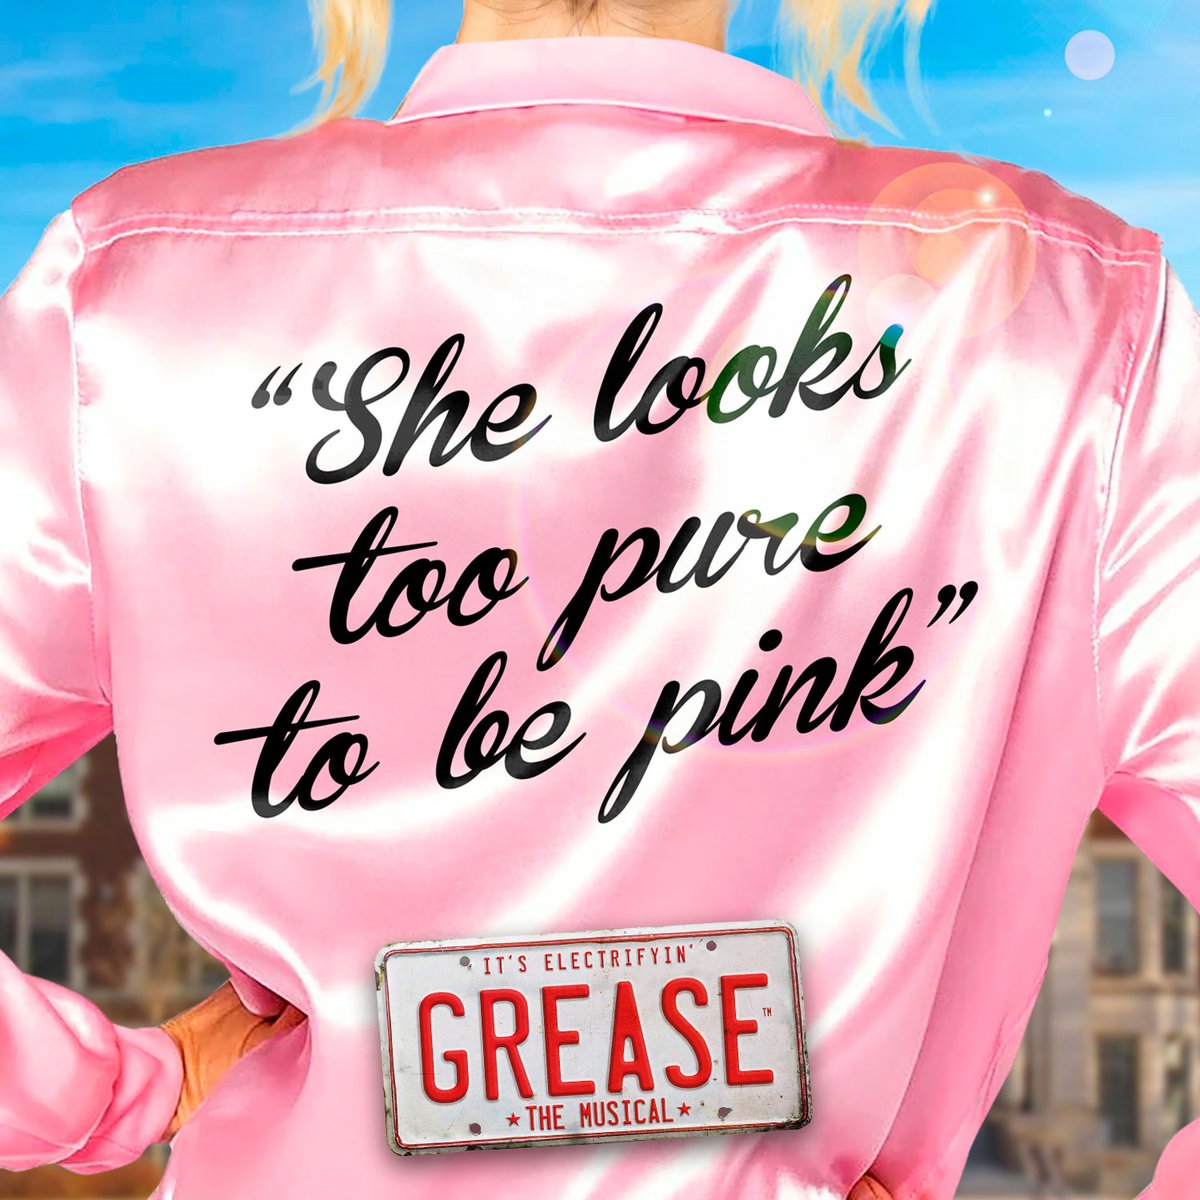 💗 THREE MONTHS TO GO 💗 Start your engines and get ready to pick up your Pink Ladies, @Grease_UK arrives in Birmingham in just three months time 🔥 📅 Mon 15 - Sat 20 Jul